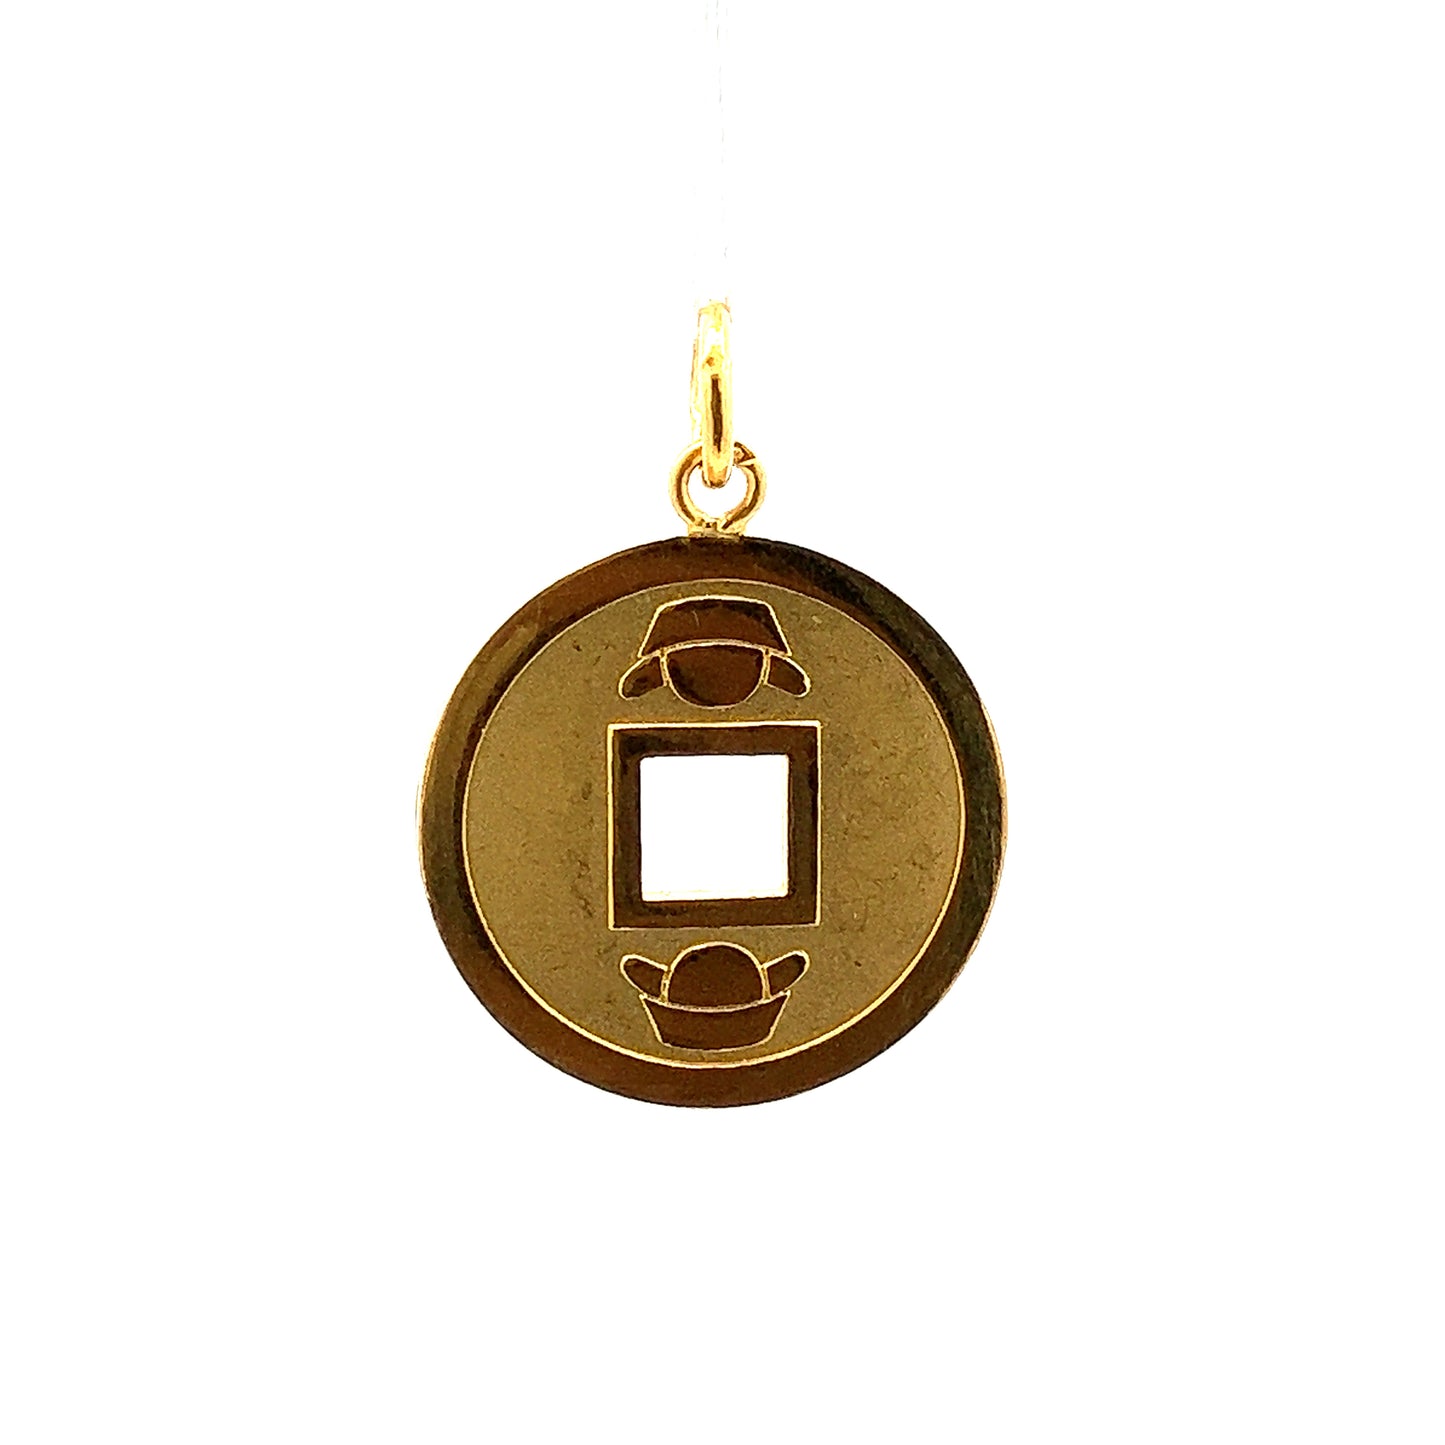 GOLD PENDANT ( 22K ) ( 4.58g ) - 0010440 Chain sold separately